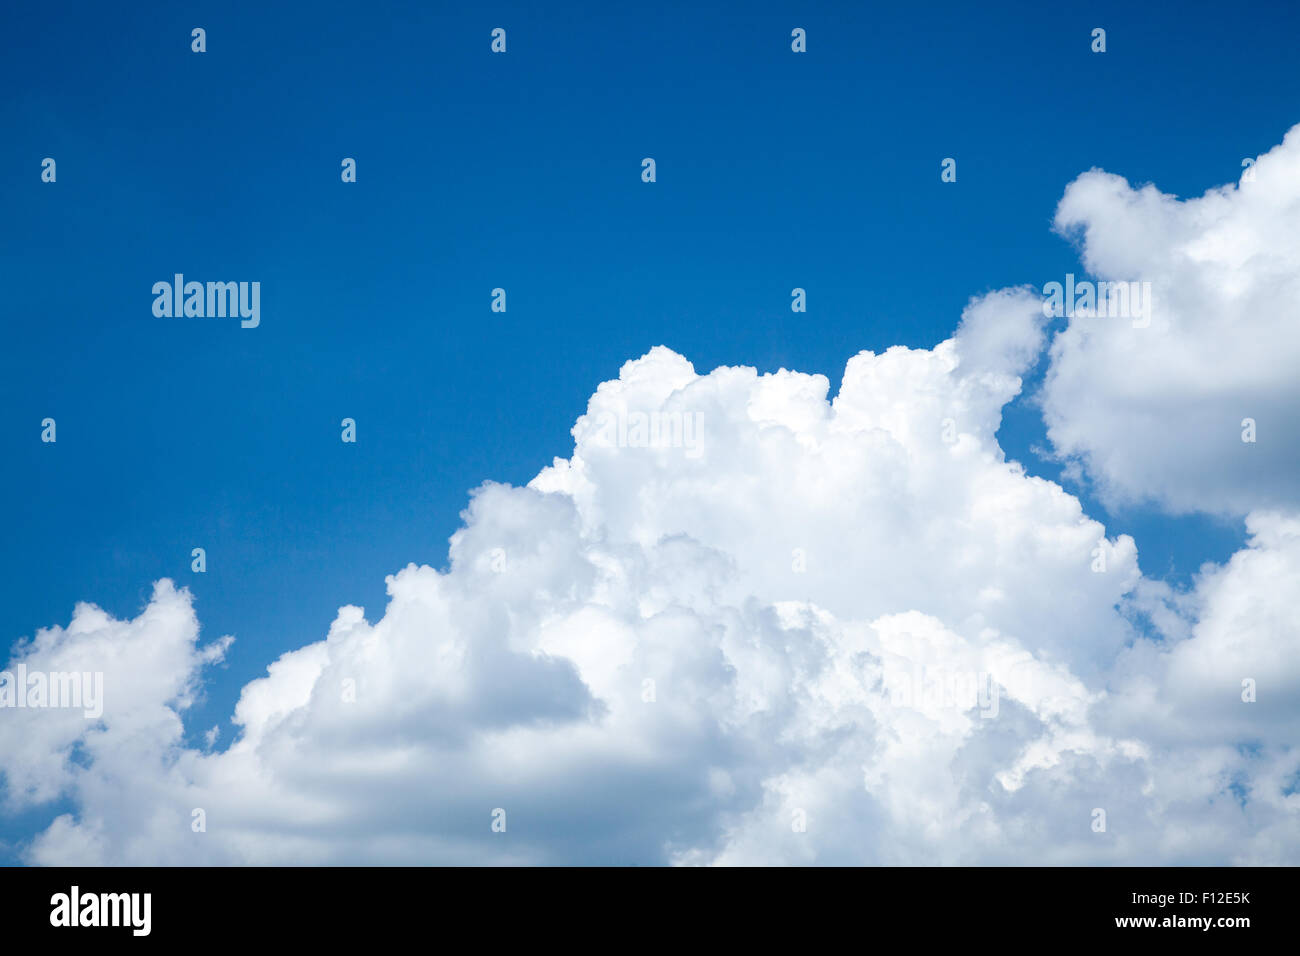 Blue Sky and White Clouds Background Cloudy Skies Texture Skyscape Pattern Stock Photo